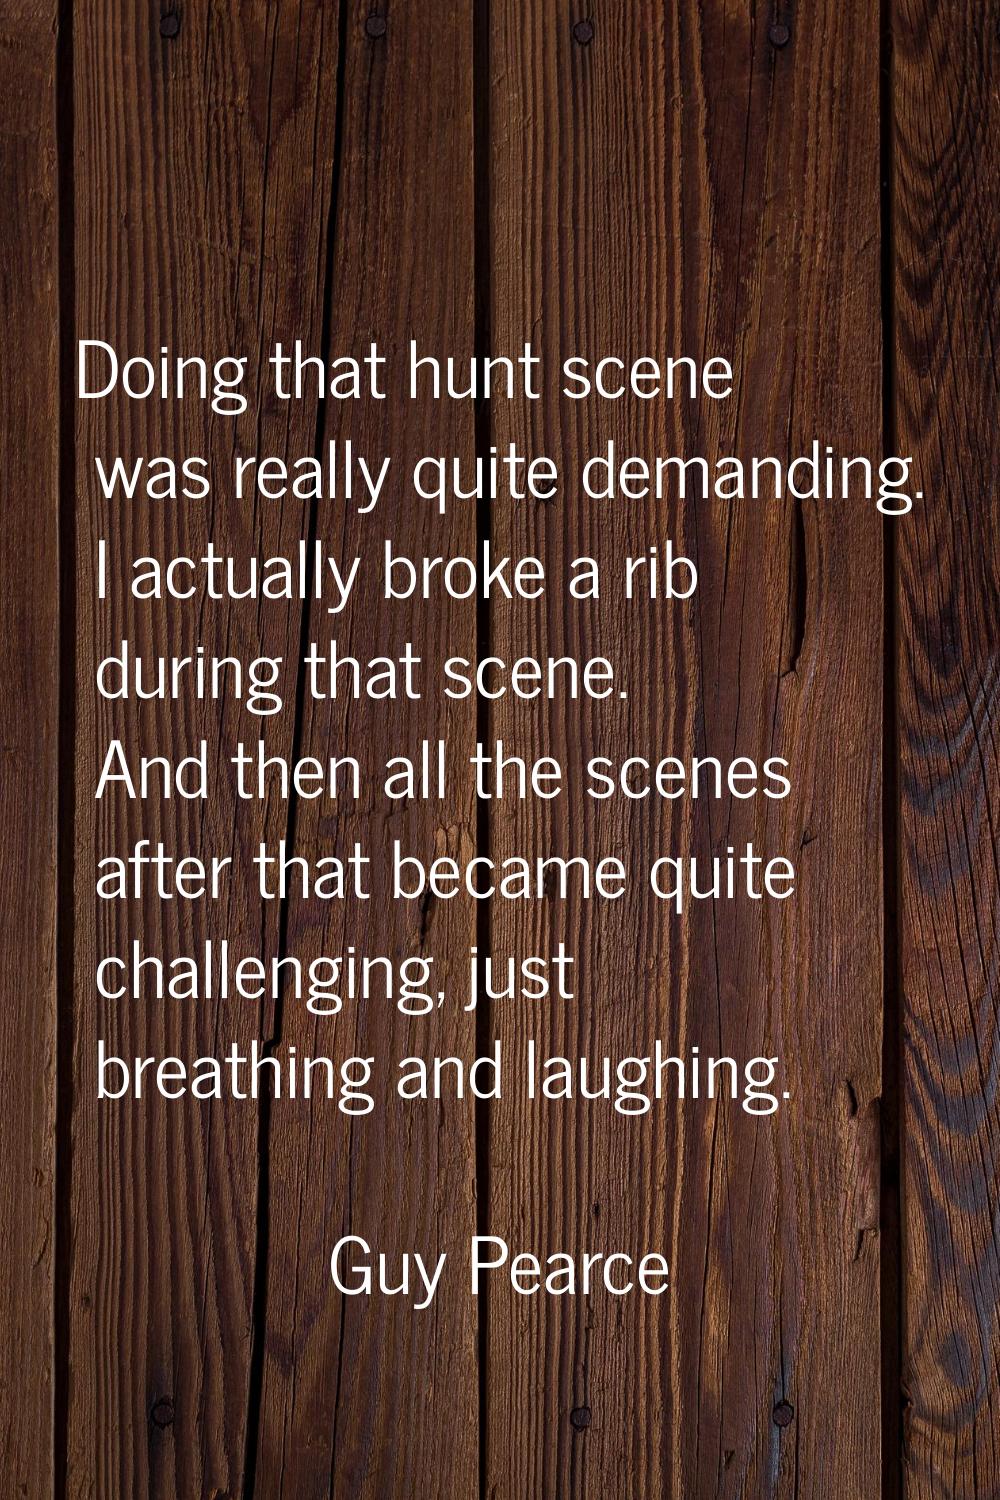 Doing that hunt scene was really quite demanding. I actually broke a rib during that scene. And the